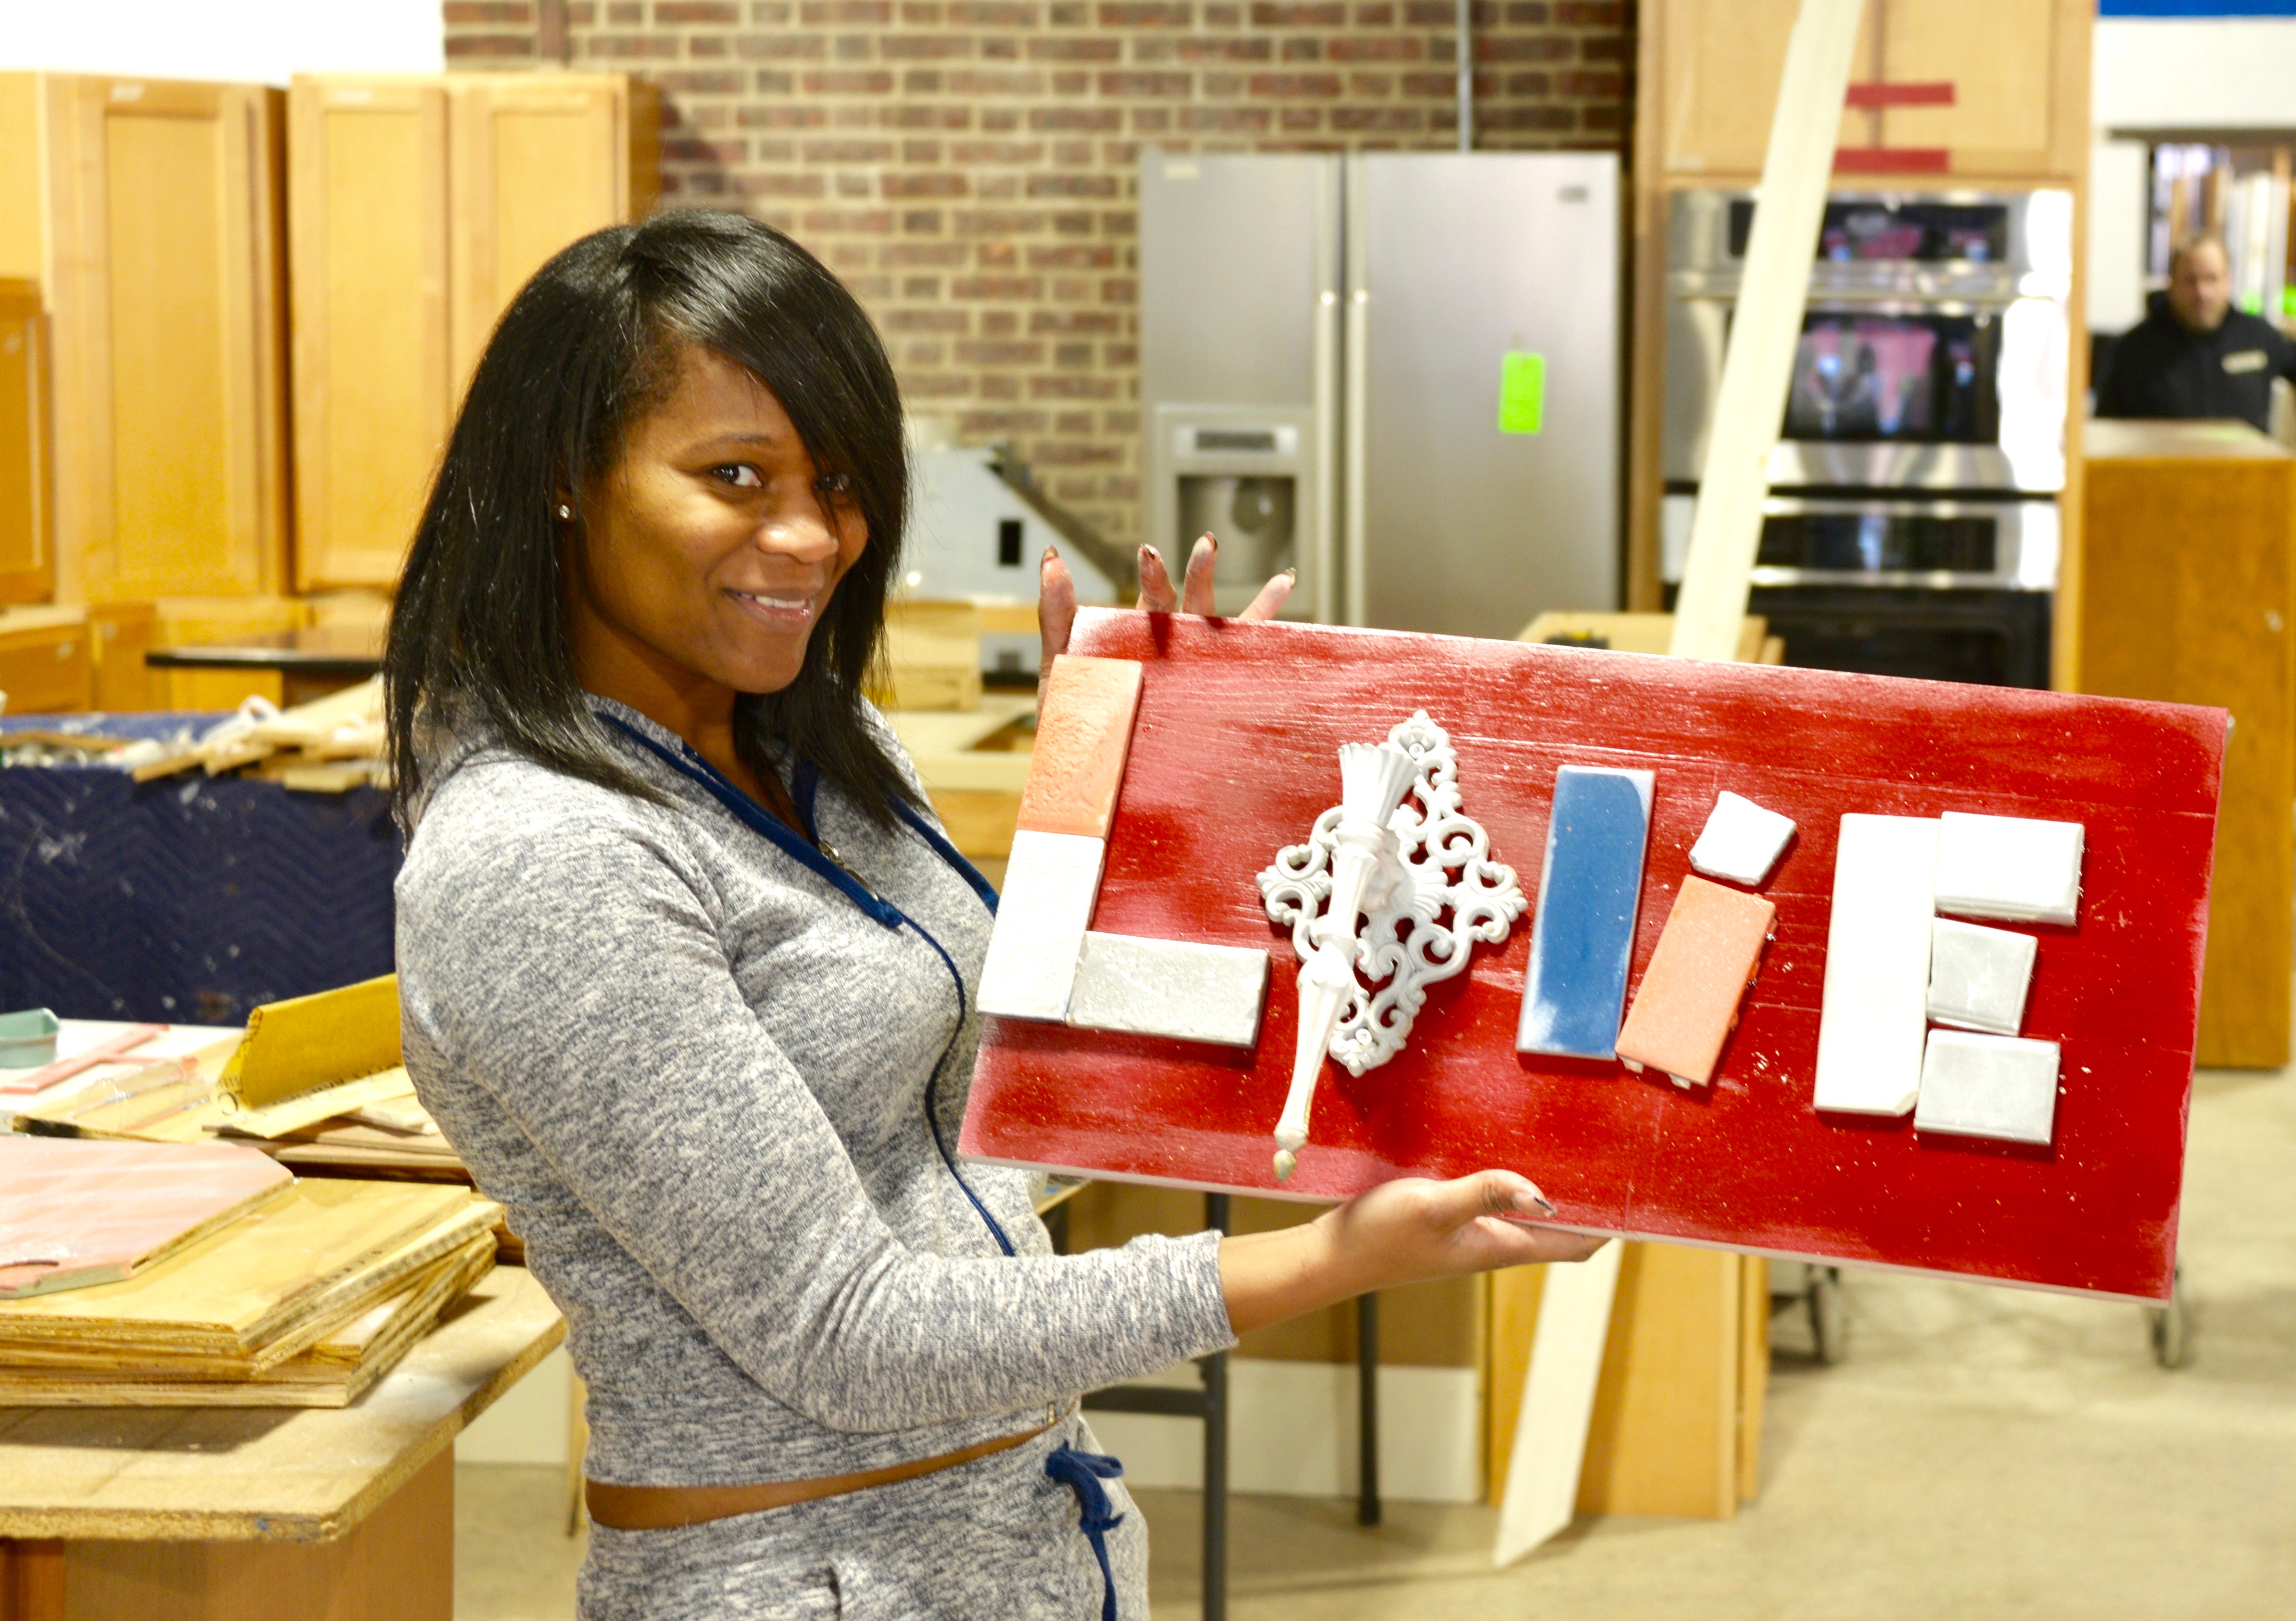 Jessica Massaquoi made this Love wall art with a wall sconce and tile at the Habitat for Humanity ReStore workshop.